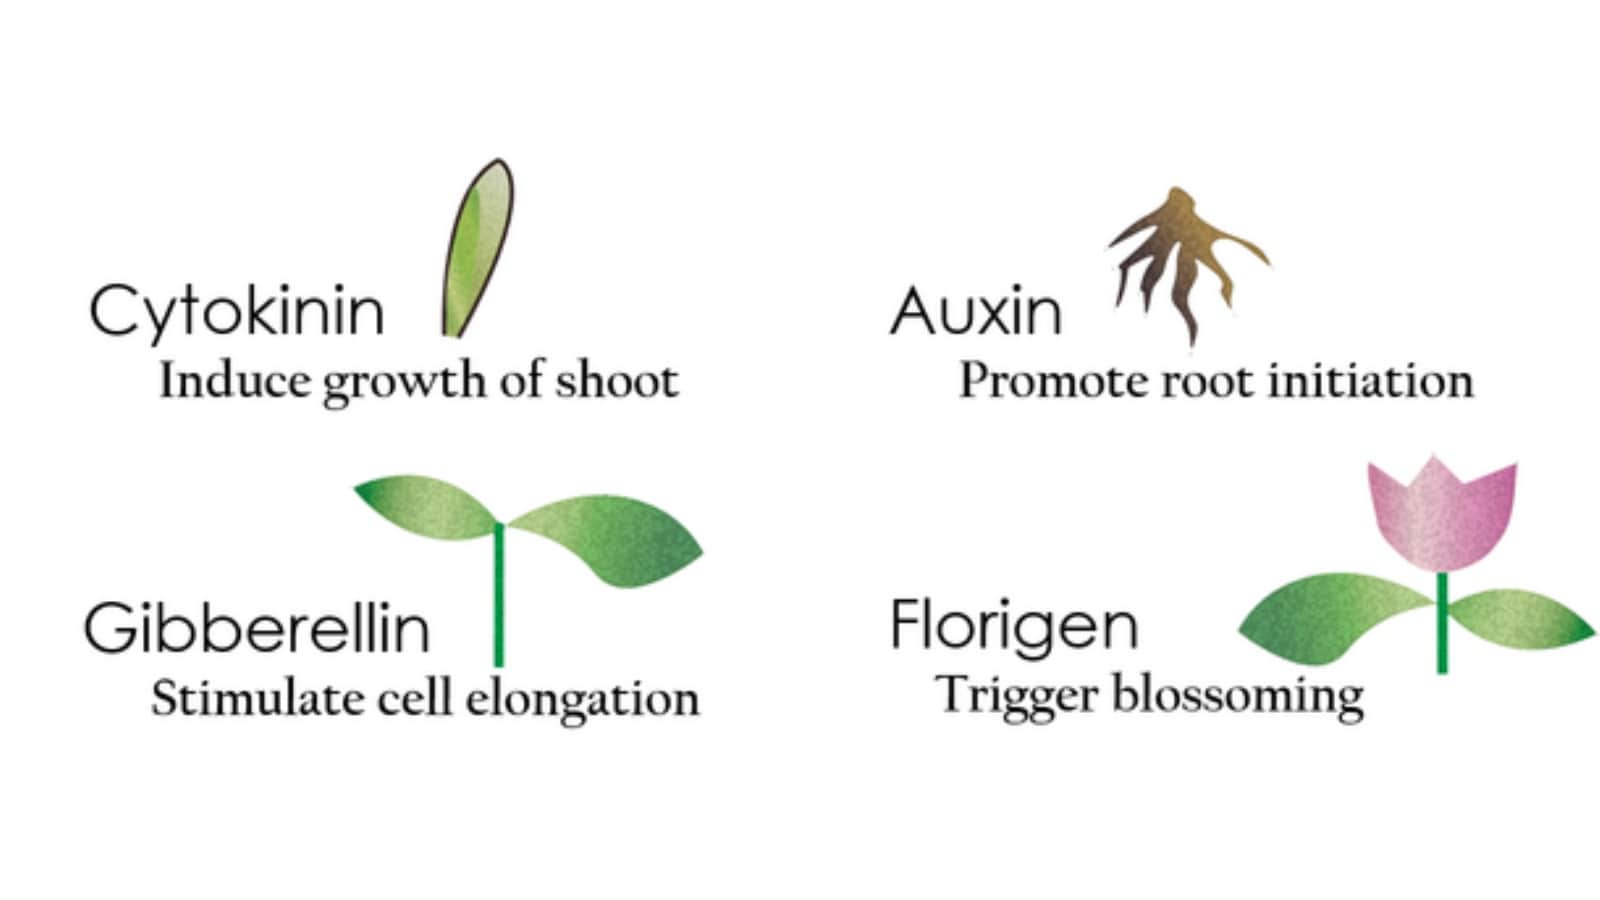 What Are The 5 Plant Growth Regulators?